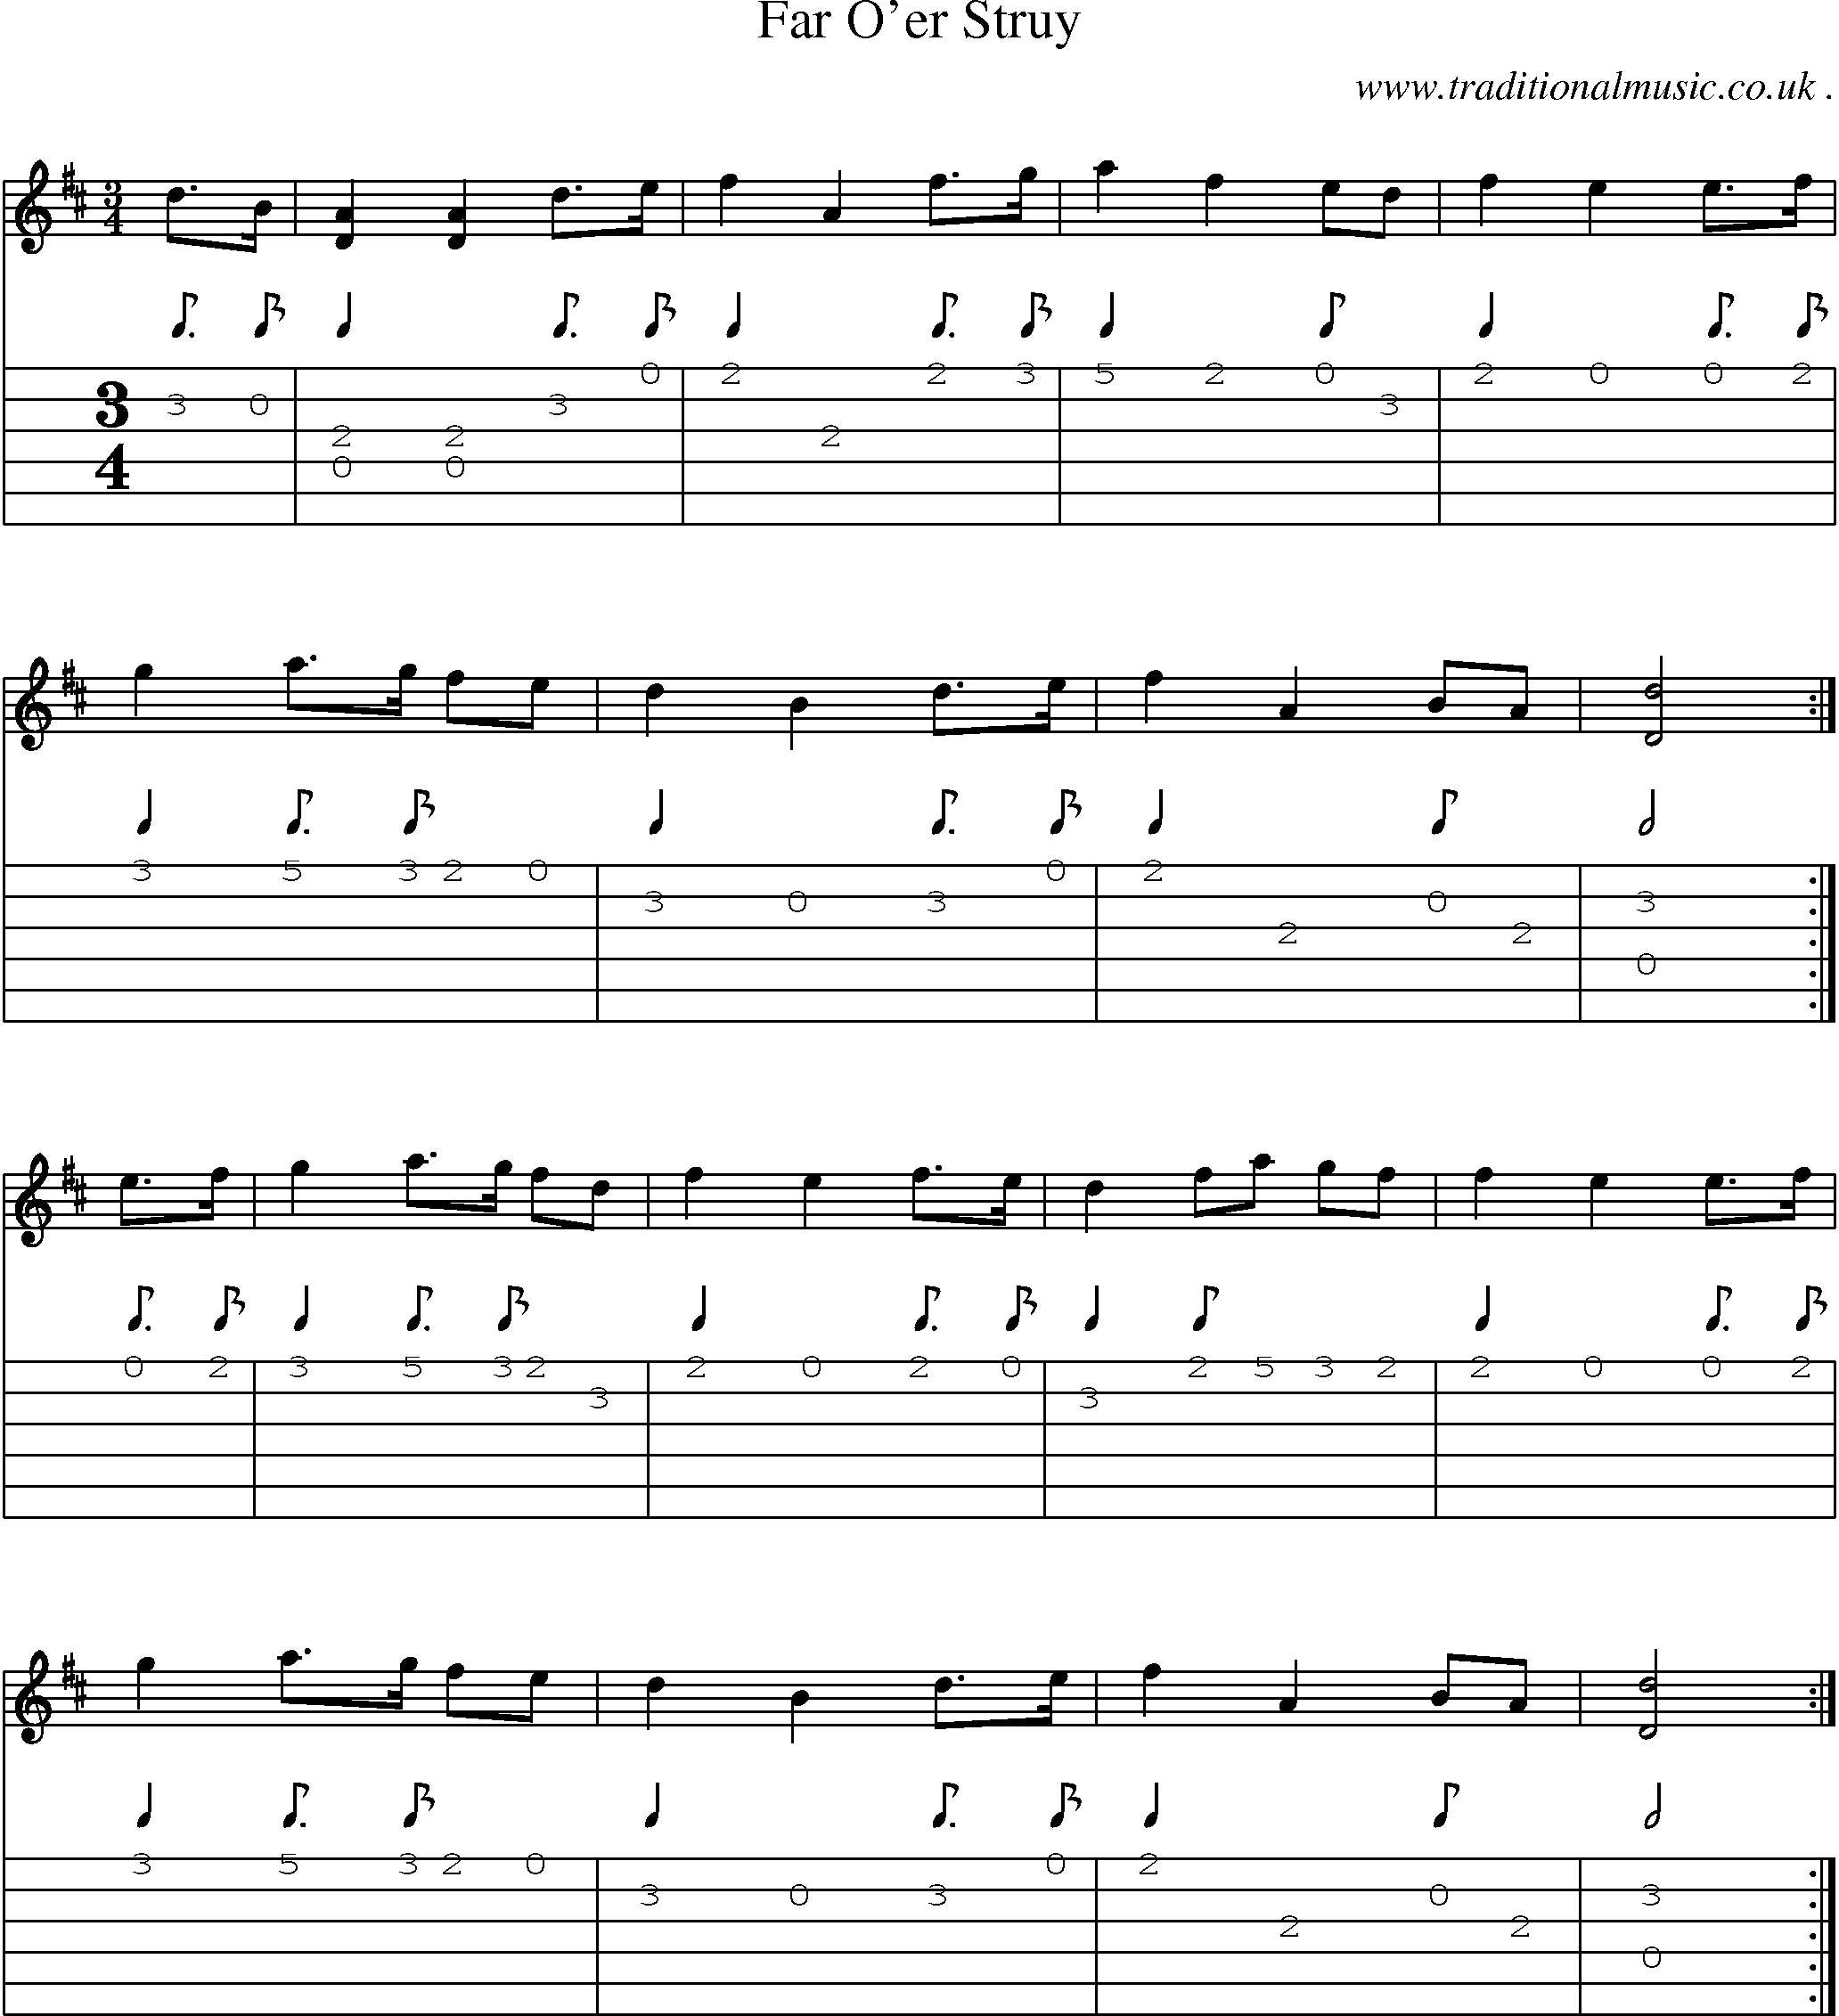 Sheet-music  score, Chords and Guitar Tabs for Far Oer Struy